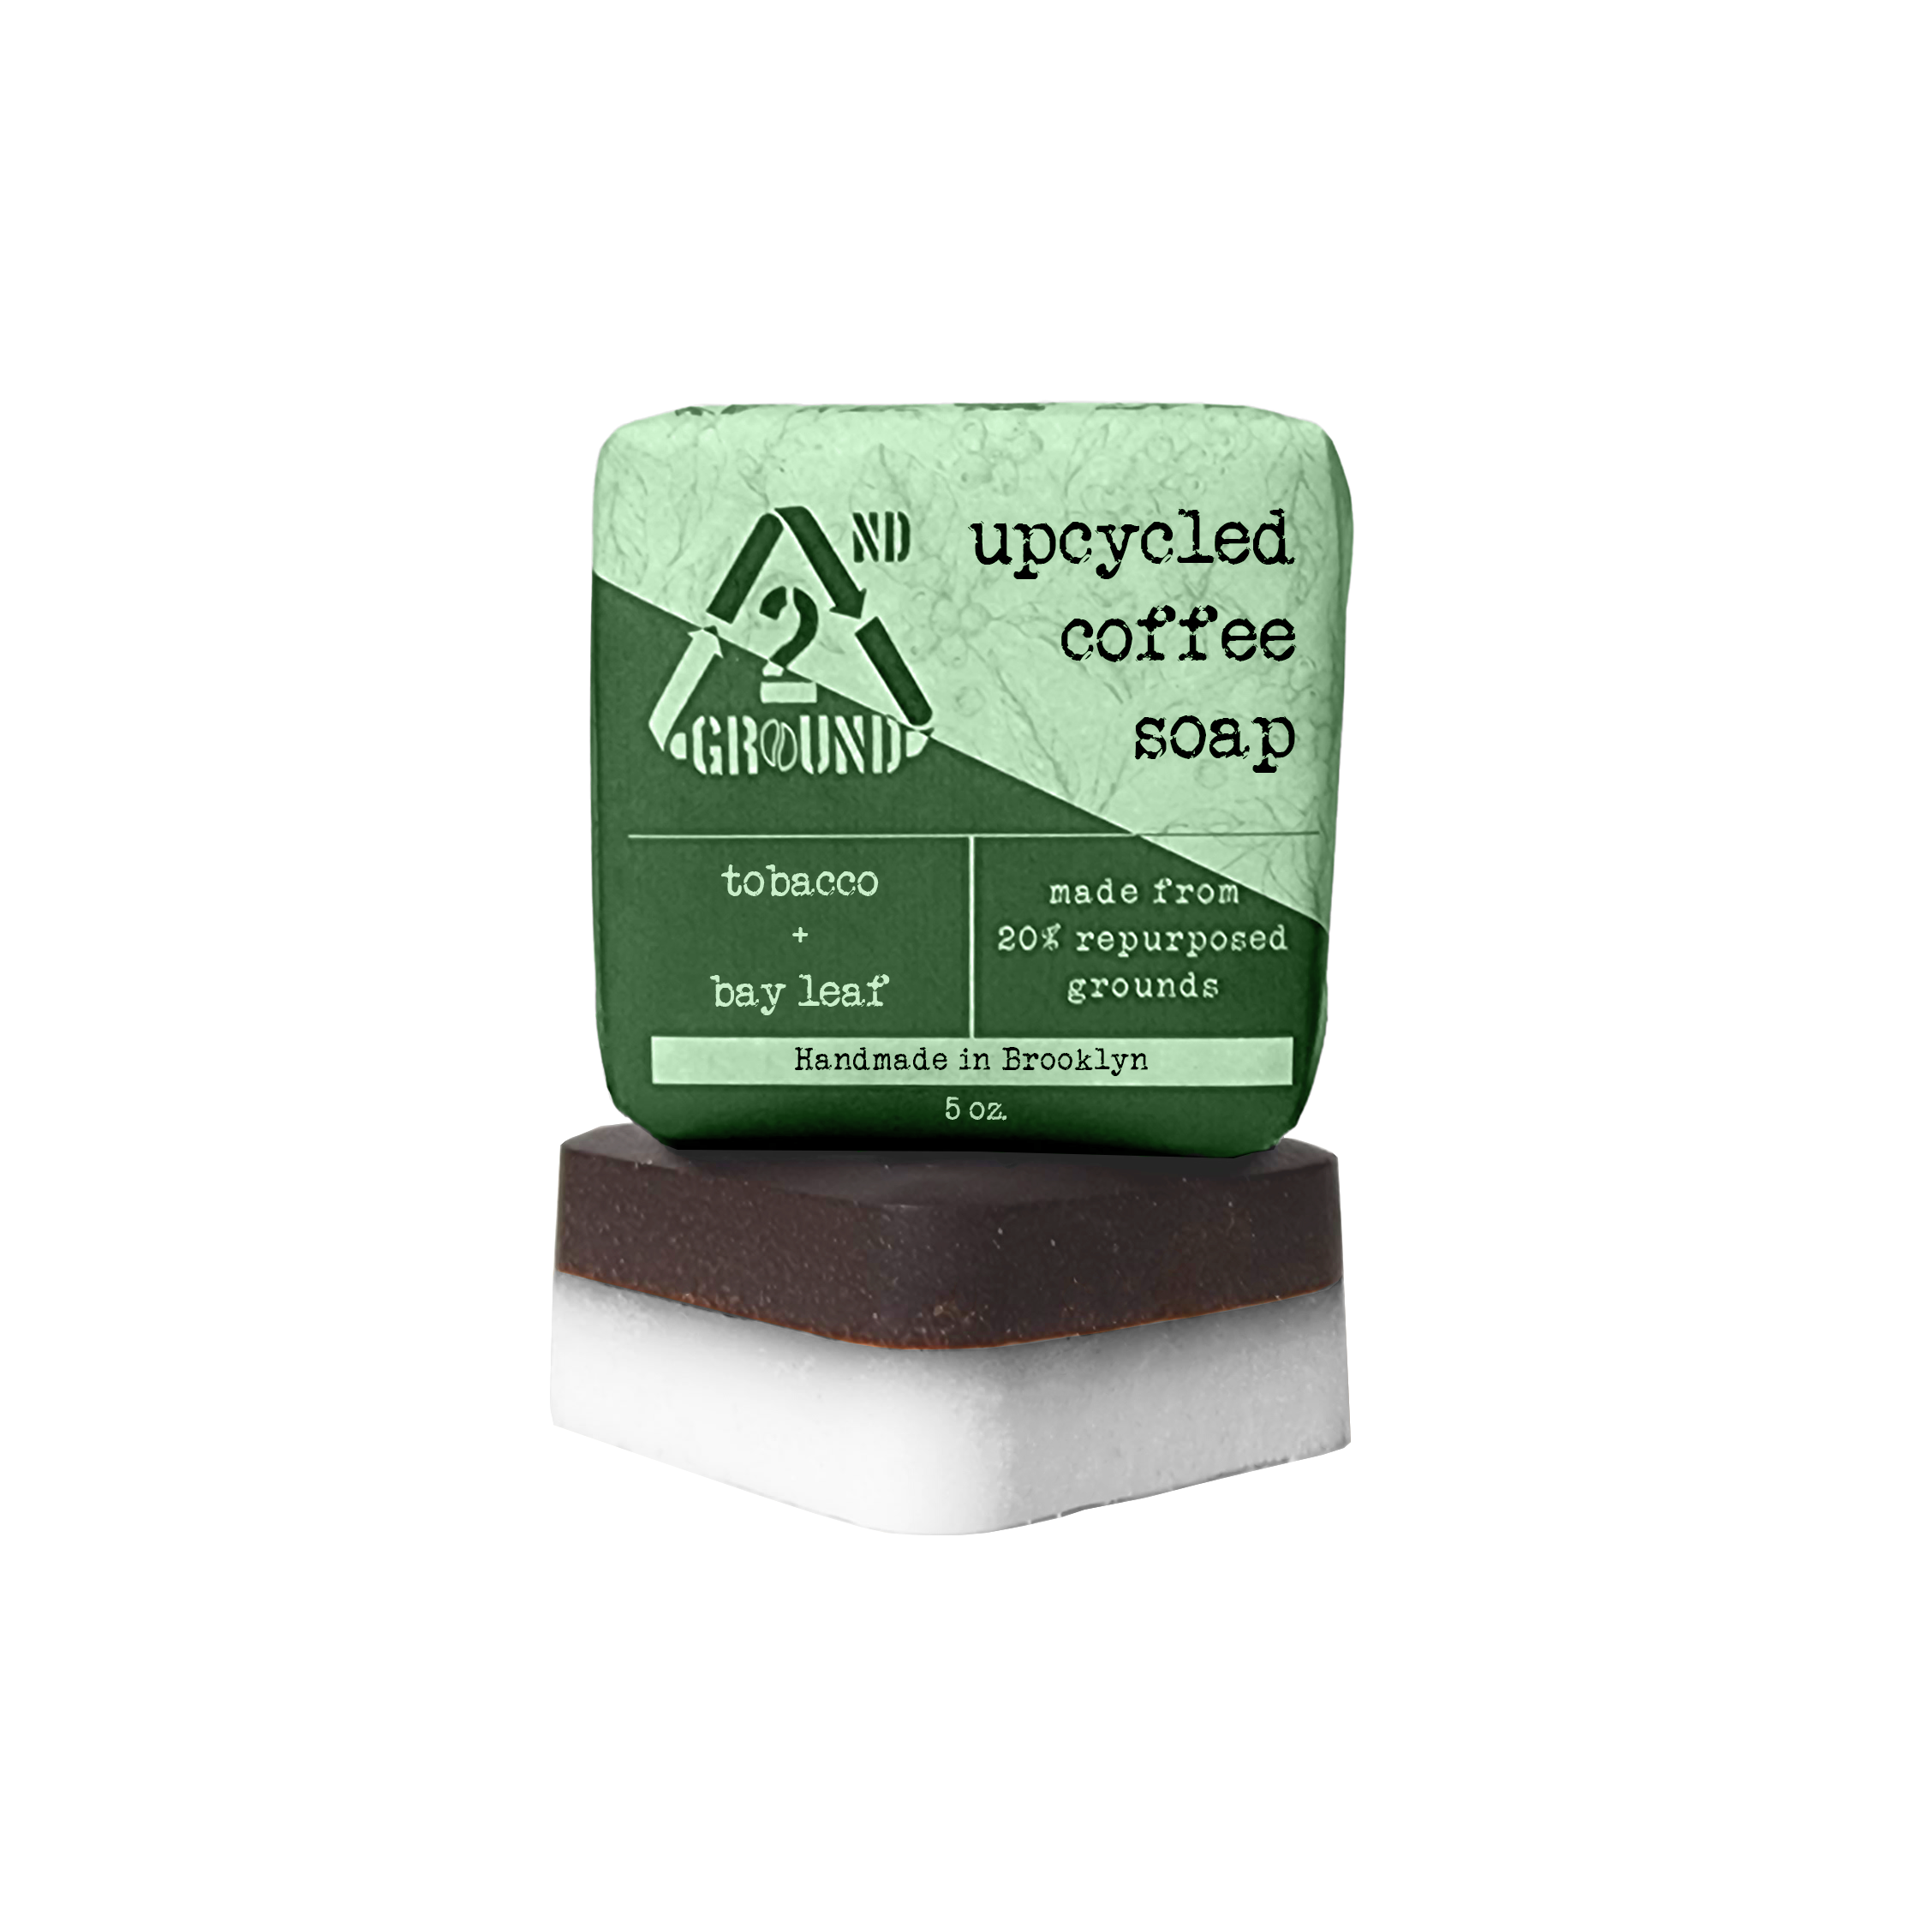 A close-up photo of the Coffee Soap bar, showing its coffee grounds and creamy texture. Description: Our Coffee Soap is made with all-natural ingredients, including coffee grounds, coconut oil, and shea butter. It is perfect for exfoliating and moisturizing your skin. Tobacco and bay leaf 